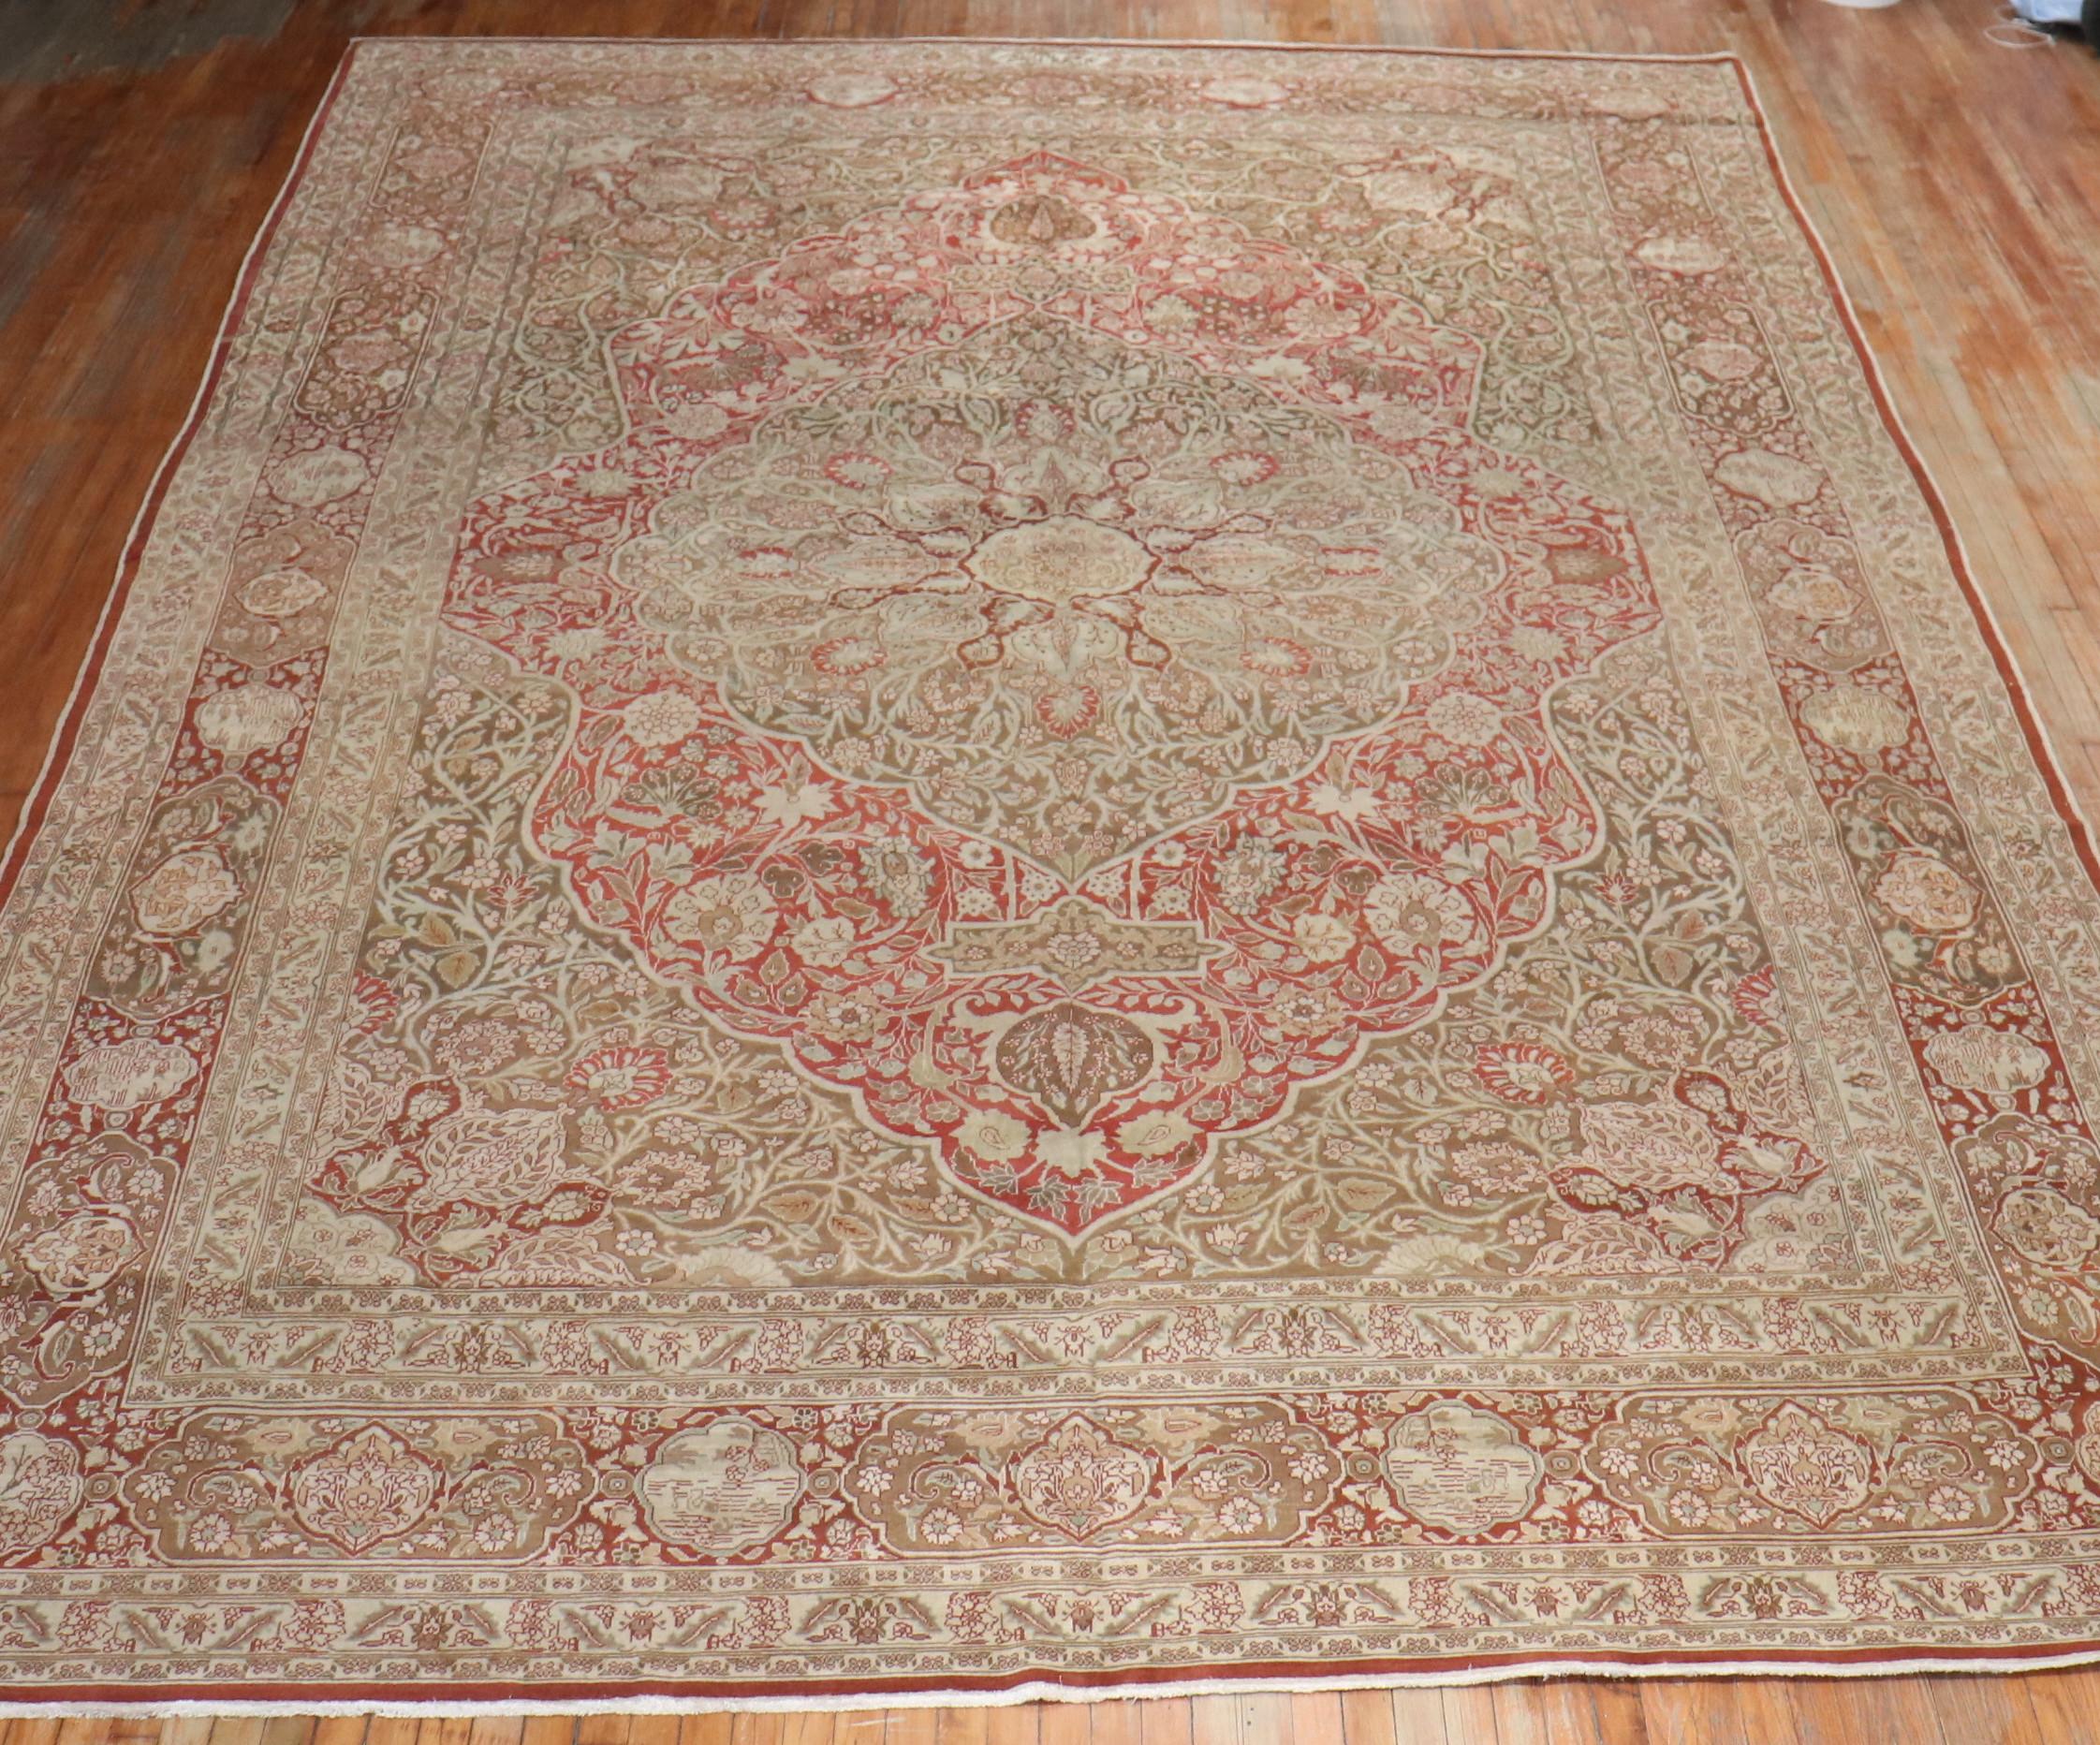 Elegant Oversize Brown Antique Persian Tabriz Carpet In Good Condition For Sale In New York, NY